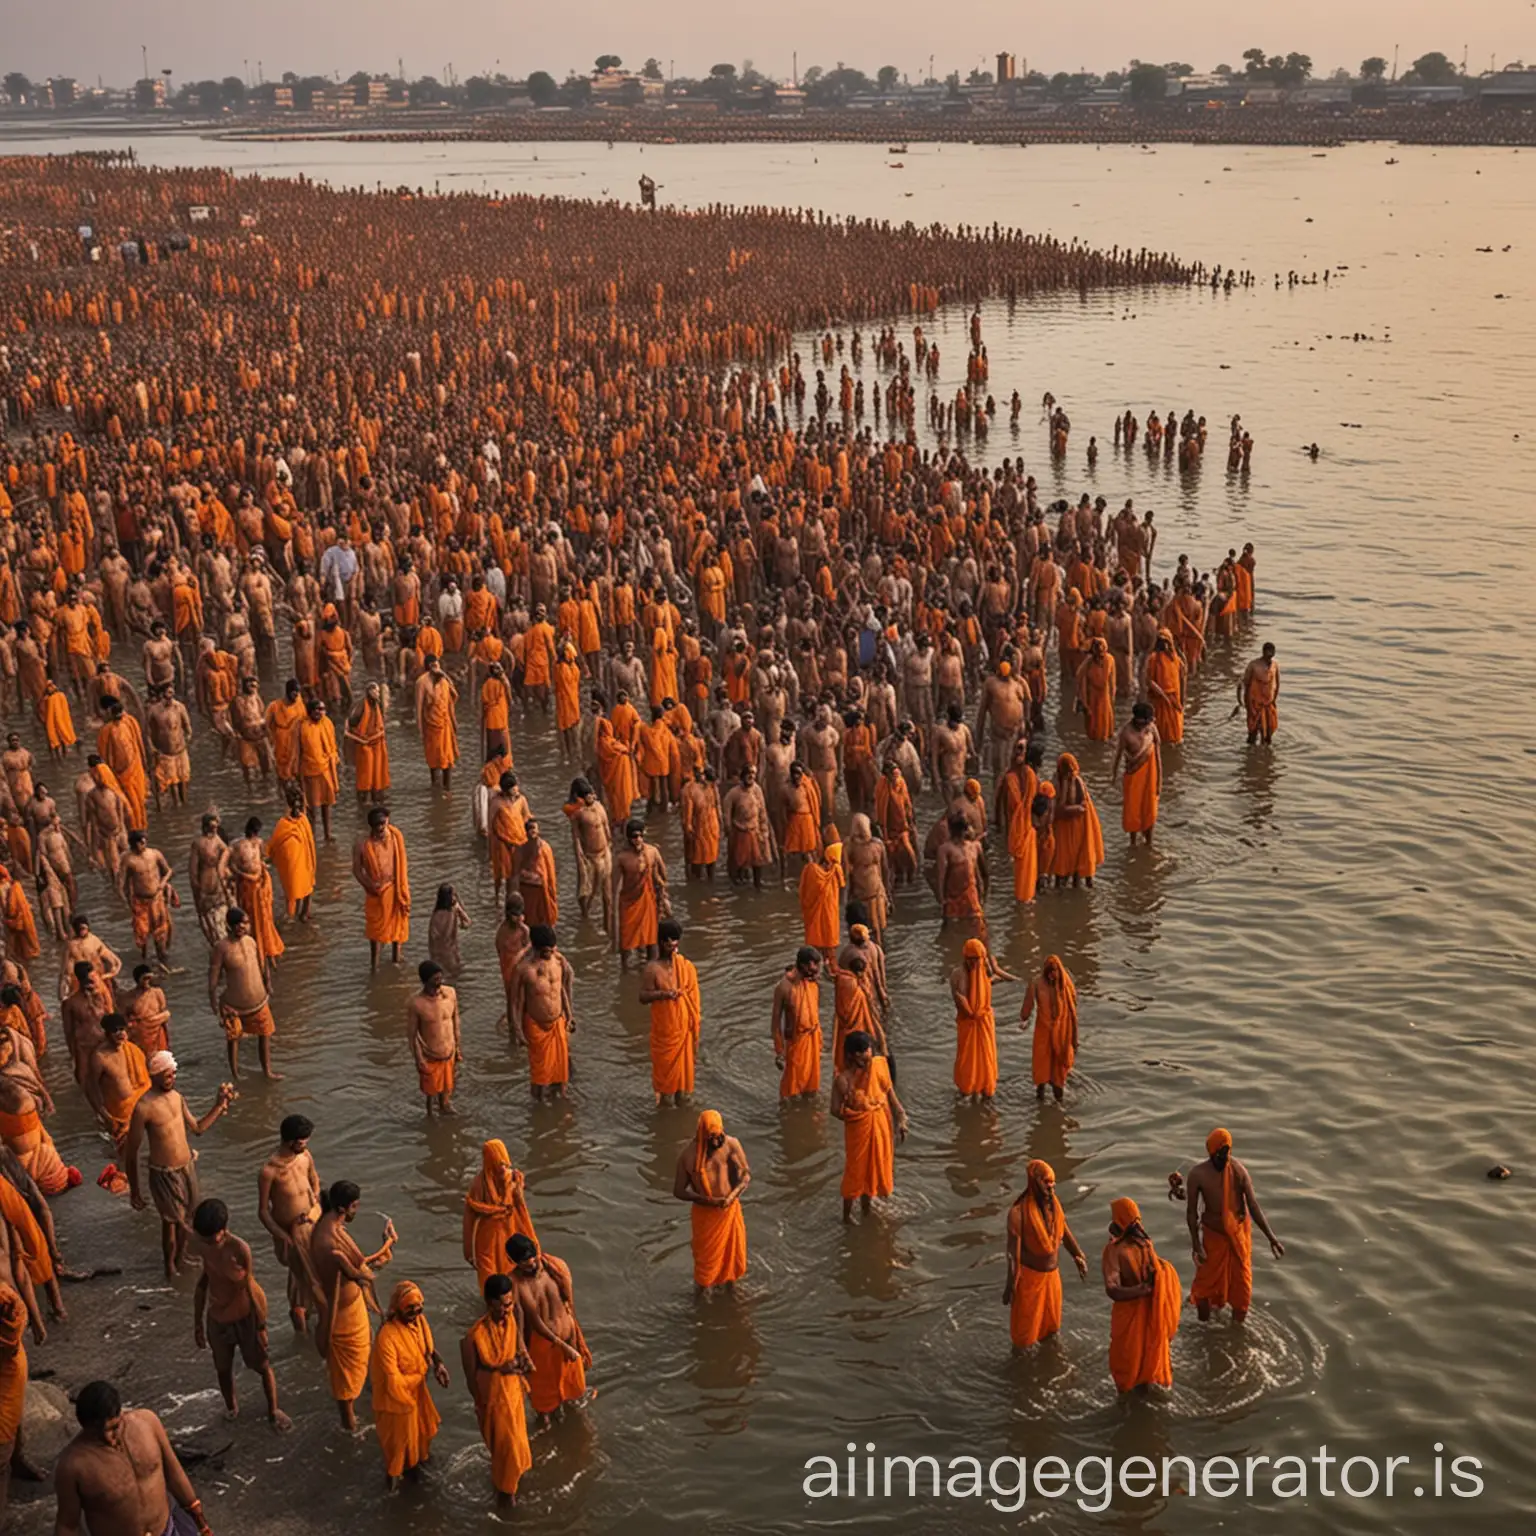 I want you to generate a picture where five people of the family are preparing to go to the sacred River for the Shahi snaan At the Maha Kumbh Mela in Prayagraj, the river should be river Ganga